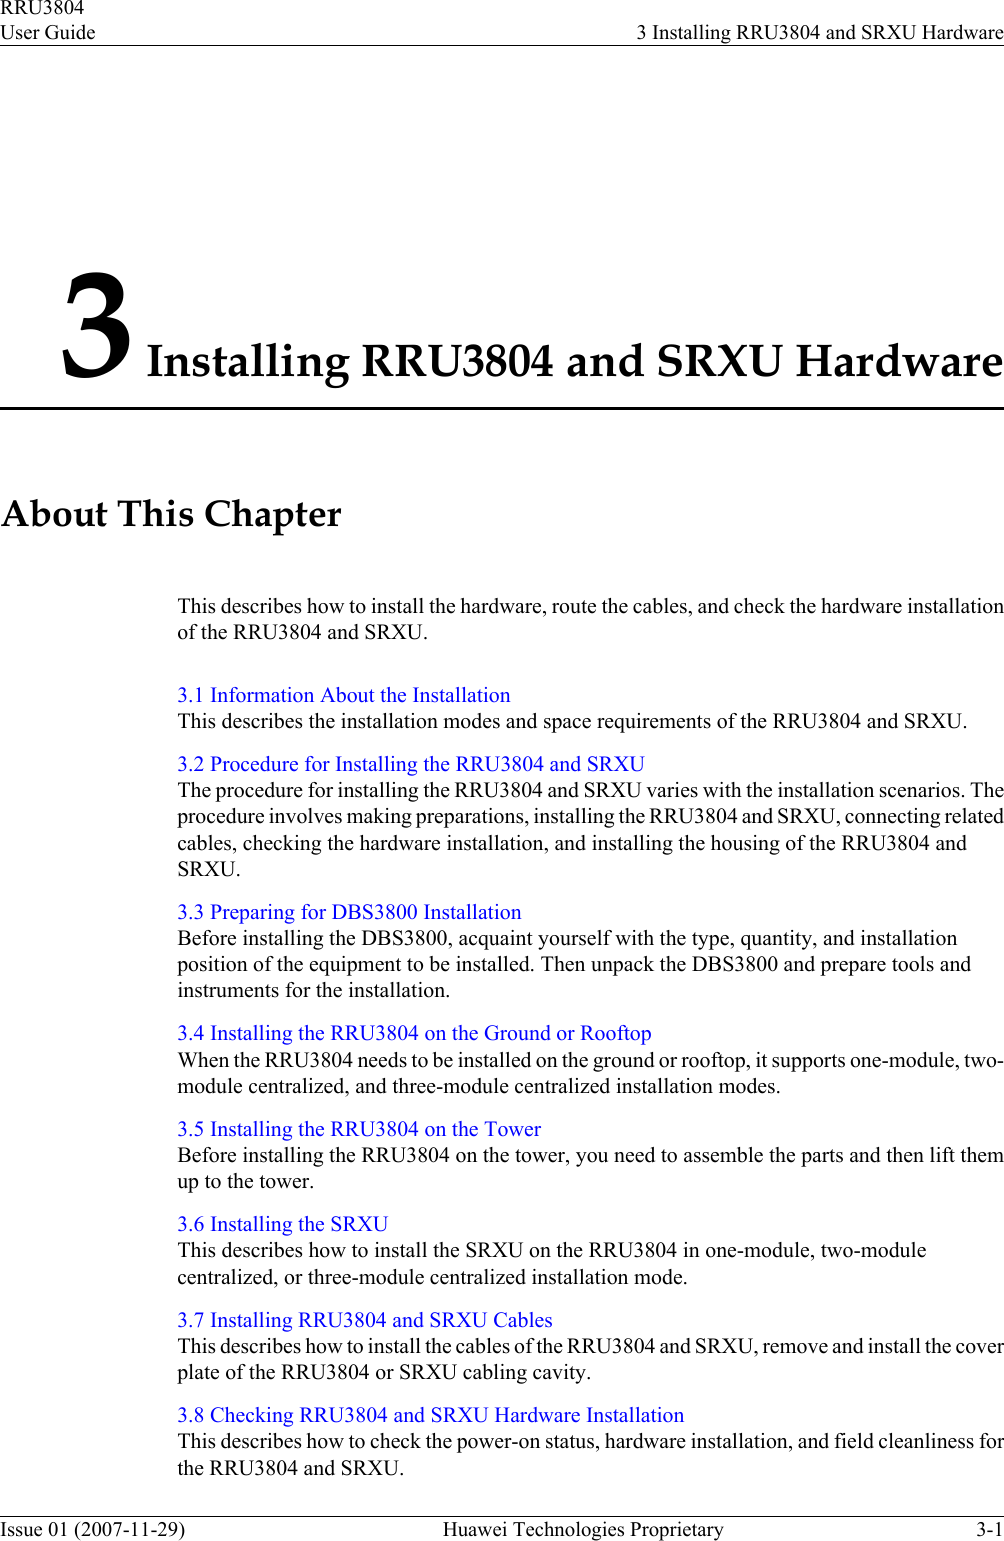 3 Installing RRU3804 and SRXU HardwareAbout This ChapterThis describes how to install the hardware, route the cables, and check the hardware installationof the RRU3804 and SRXU.3.1 Information About the InstallationThis describes the installation modes and space requirements of the RRU3804 and SRXU.3.2 Procedure for Installing the RRU3804 and SRXUThe procedure for installing the RRU3804 and SRXU varies with the installation scenarios. Theprocedure involves making preparations, installing the RRU3804 and SRXU, connecting relatedcables, checking the hardware installation, and installing the housing of the RRU3804 andSRXU.3.3 Preparing for DBS3800 InstallationBefore installing the DBS3800, acquaint yourself with the type, quantity, and installationposition of the equipment to be installed. Then unpack the DBS3800 and prepare tools andinstruments for the installation.3.4 Installing the RRU3804 on the Ground or RooftopWhen the RRU3804 needs to be installed on the ground or rooftop, it supports one-module, two-module centralized, and three-module centralized installation modes.3.5 Installing the RRU3804 on the TowerBefore installing the RRU3804 on the tower, you need to assemble the parts and then lift themup to the tower.3.6 Installing the SRXUThis describes how to install the SRXU on the RRU3804 in one-module, two-modulecentralized, or three-module centralized installation mode.3.7 Installing RRU3804 and SRXU CablesThis describes how to install the cables of the RRU3804 and SRXU, remove and install the coverplate of the RRU3804 or SRXU cabling cavity.3.8 Checking RRU3804 and SRXU Hardware InstallationThis describes how to check the power-on status, hardware installation, and field cleanliness forthe RRU3804 and SRXU.RRU3804User Guide 3 Installing RRU3804 and SRXU HardwareIssue 01 (2007-11-29)  Huawei Technologies Proprietary 3-1